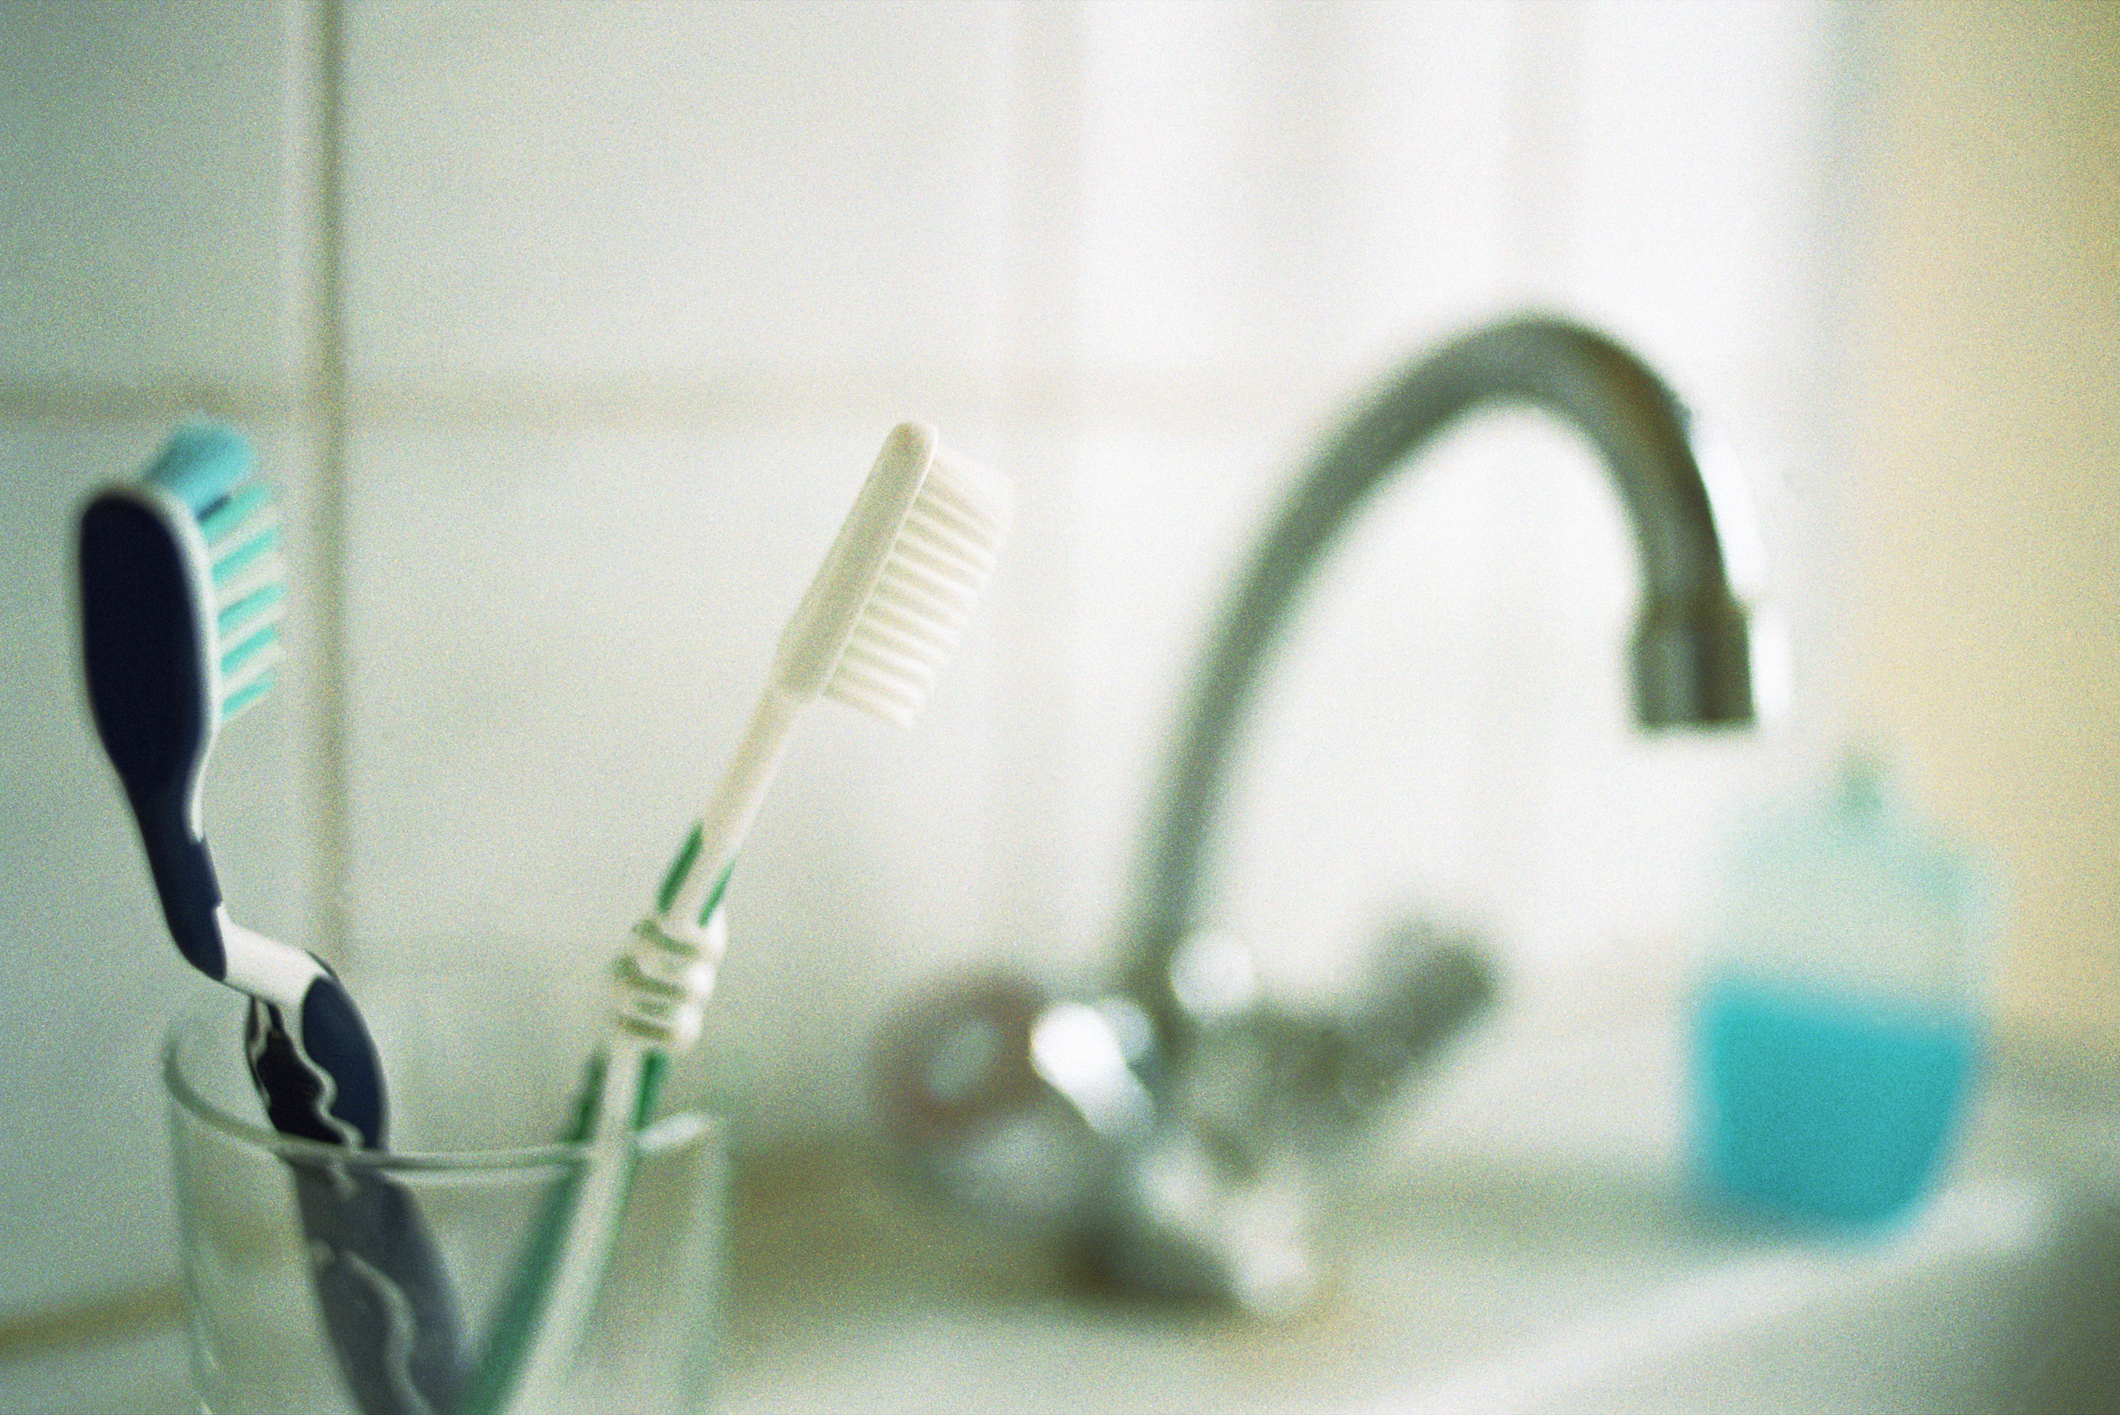 Two toothbrushes in a cup near a bathroom sink, symbolizing cohabitation and shared routines